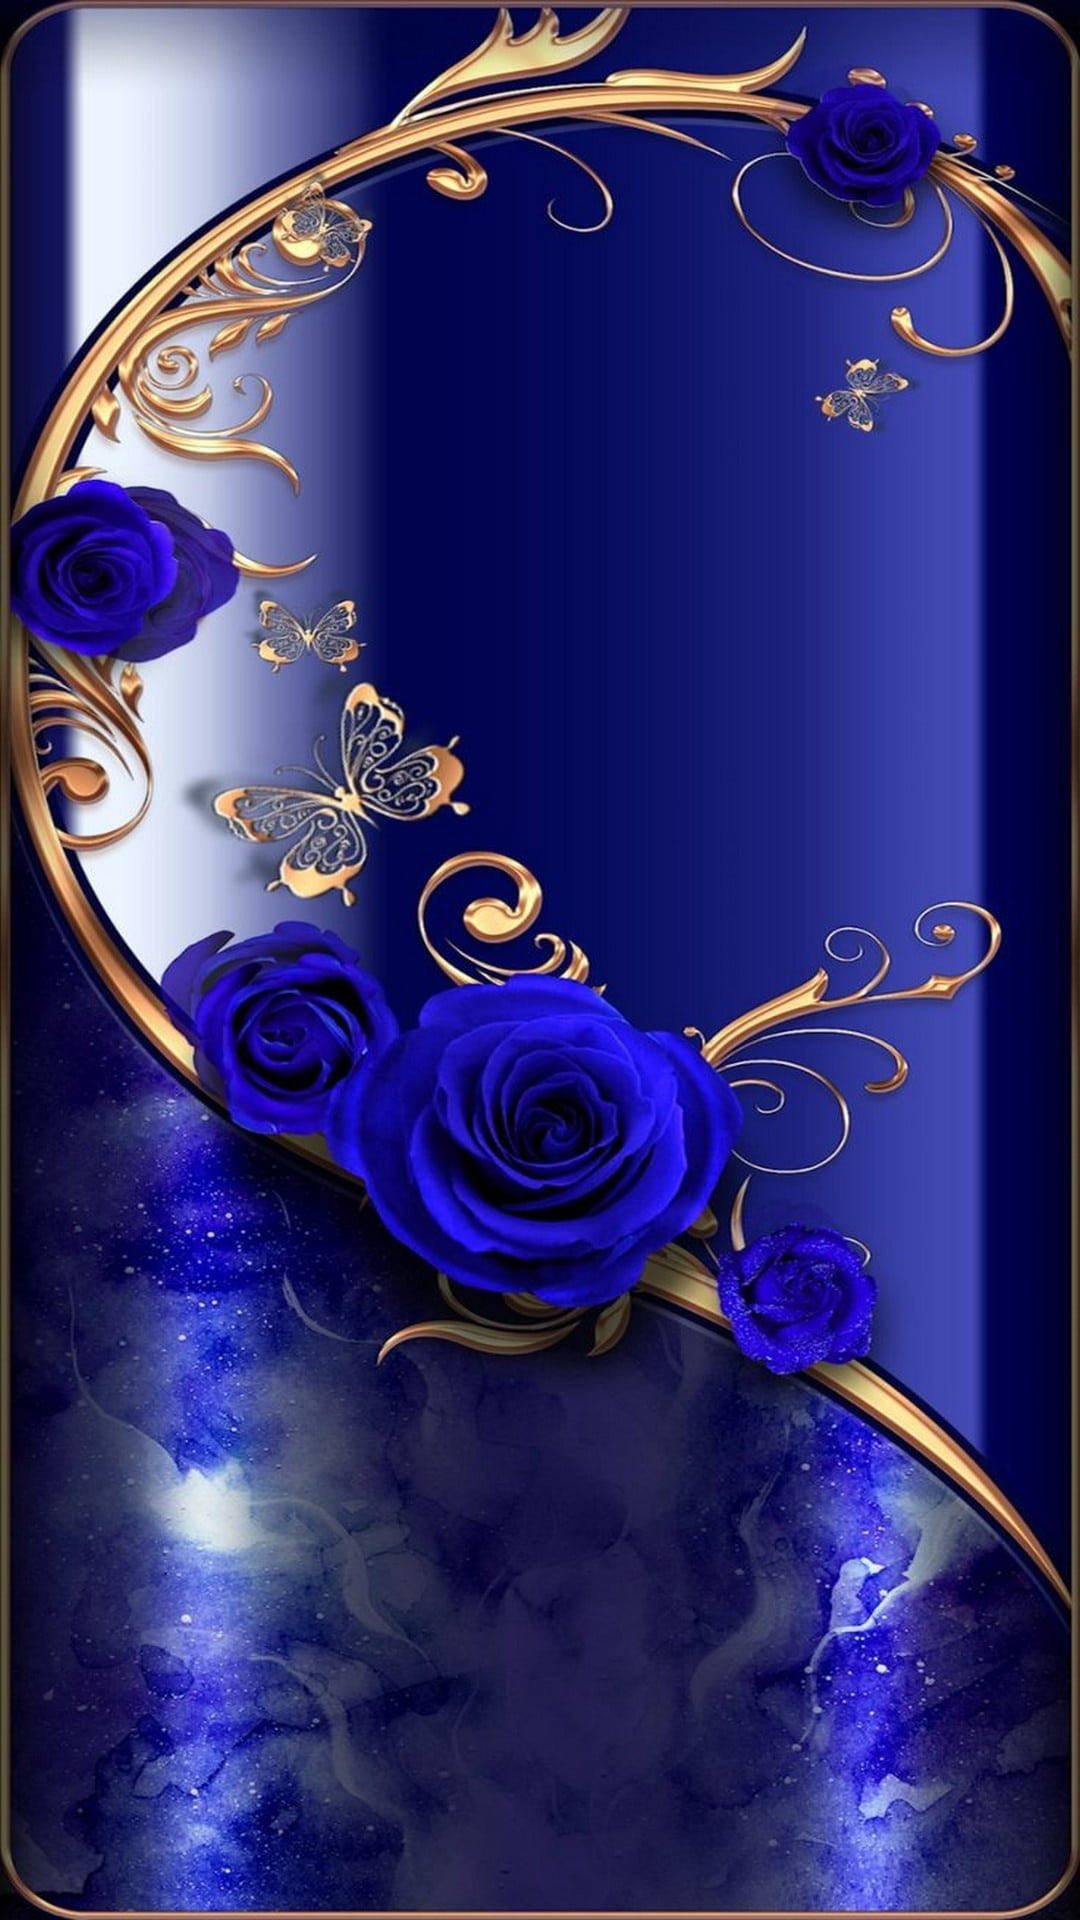 Iphone 12 Pro Max Gold With Roses Background